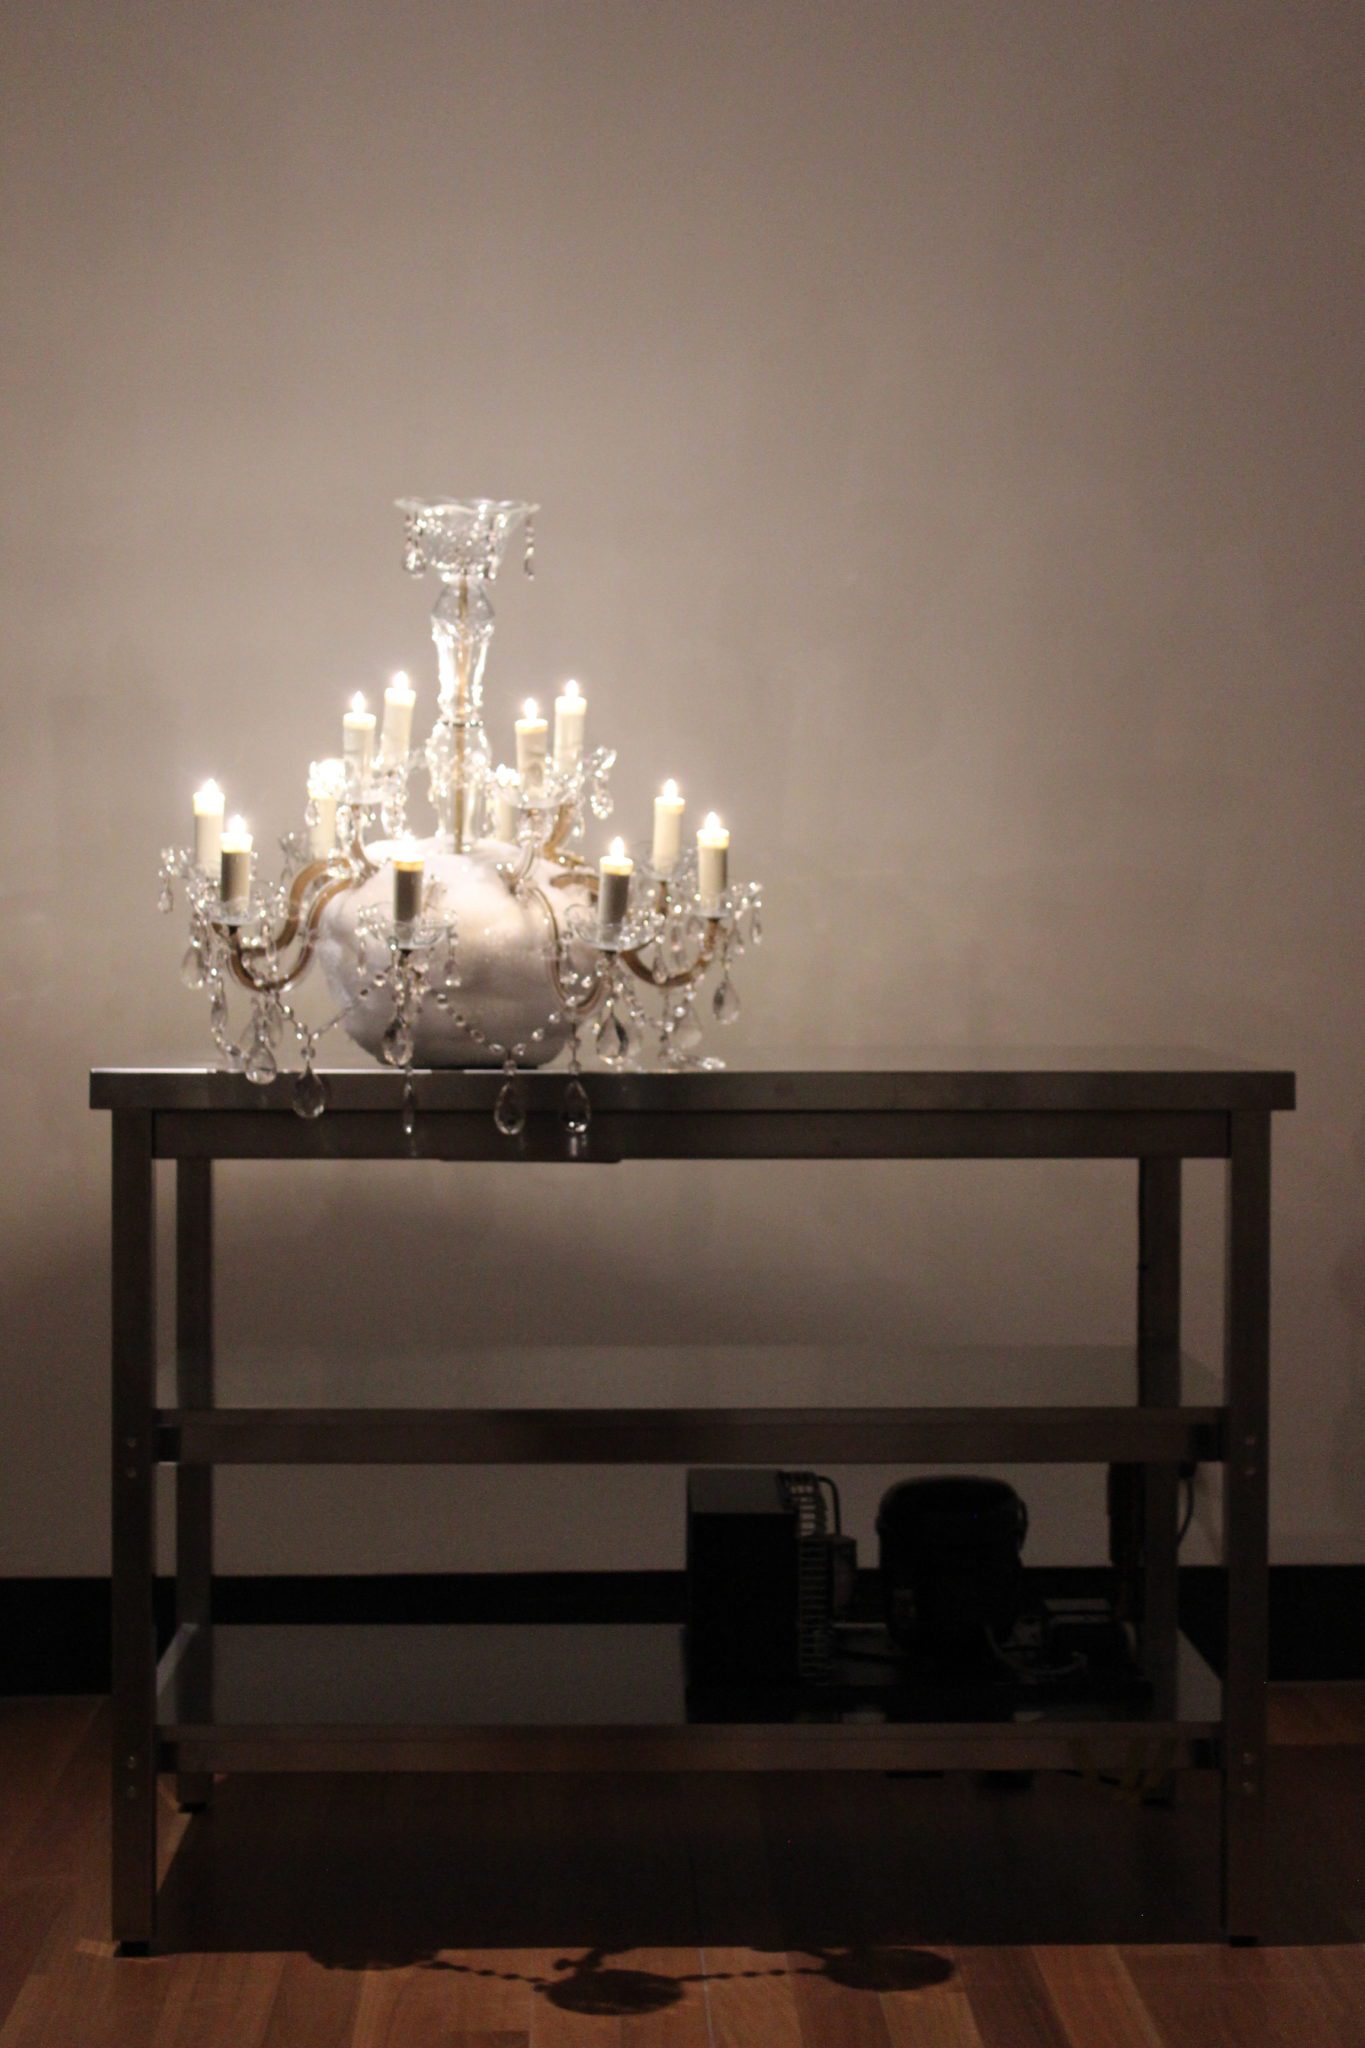 Nicholas Folland, A job for tomorrow..., 2009, Refrigeration unit, stainless steel bench, chandelier, 150 x 120 x 80 cm, Latrobe Regional Gallery Collection, purchased 2009.